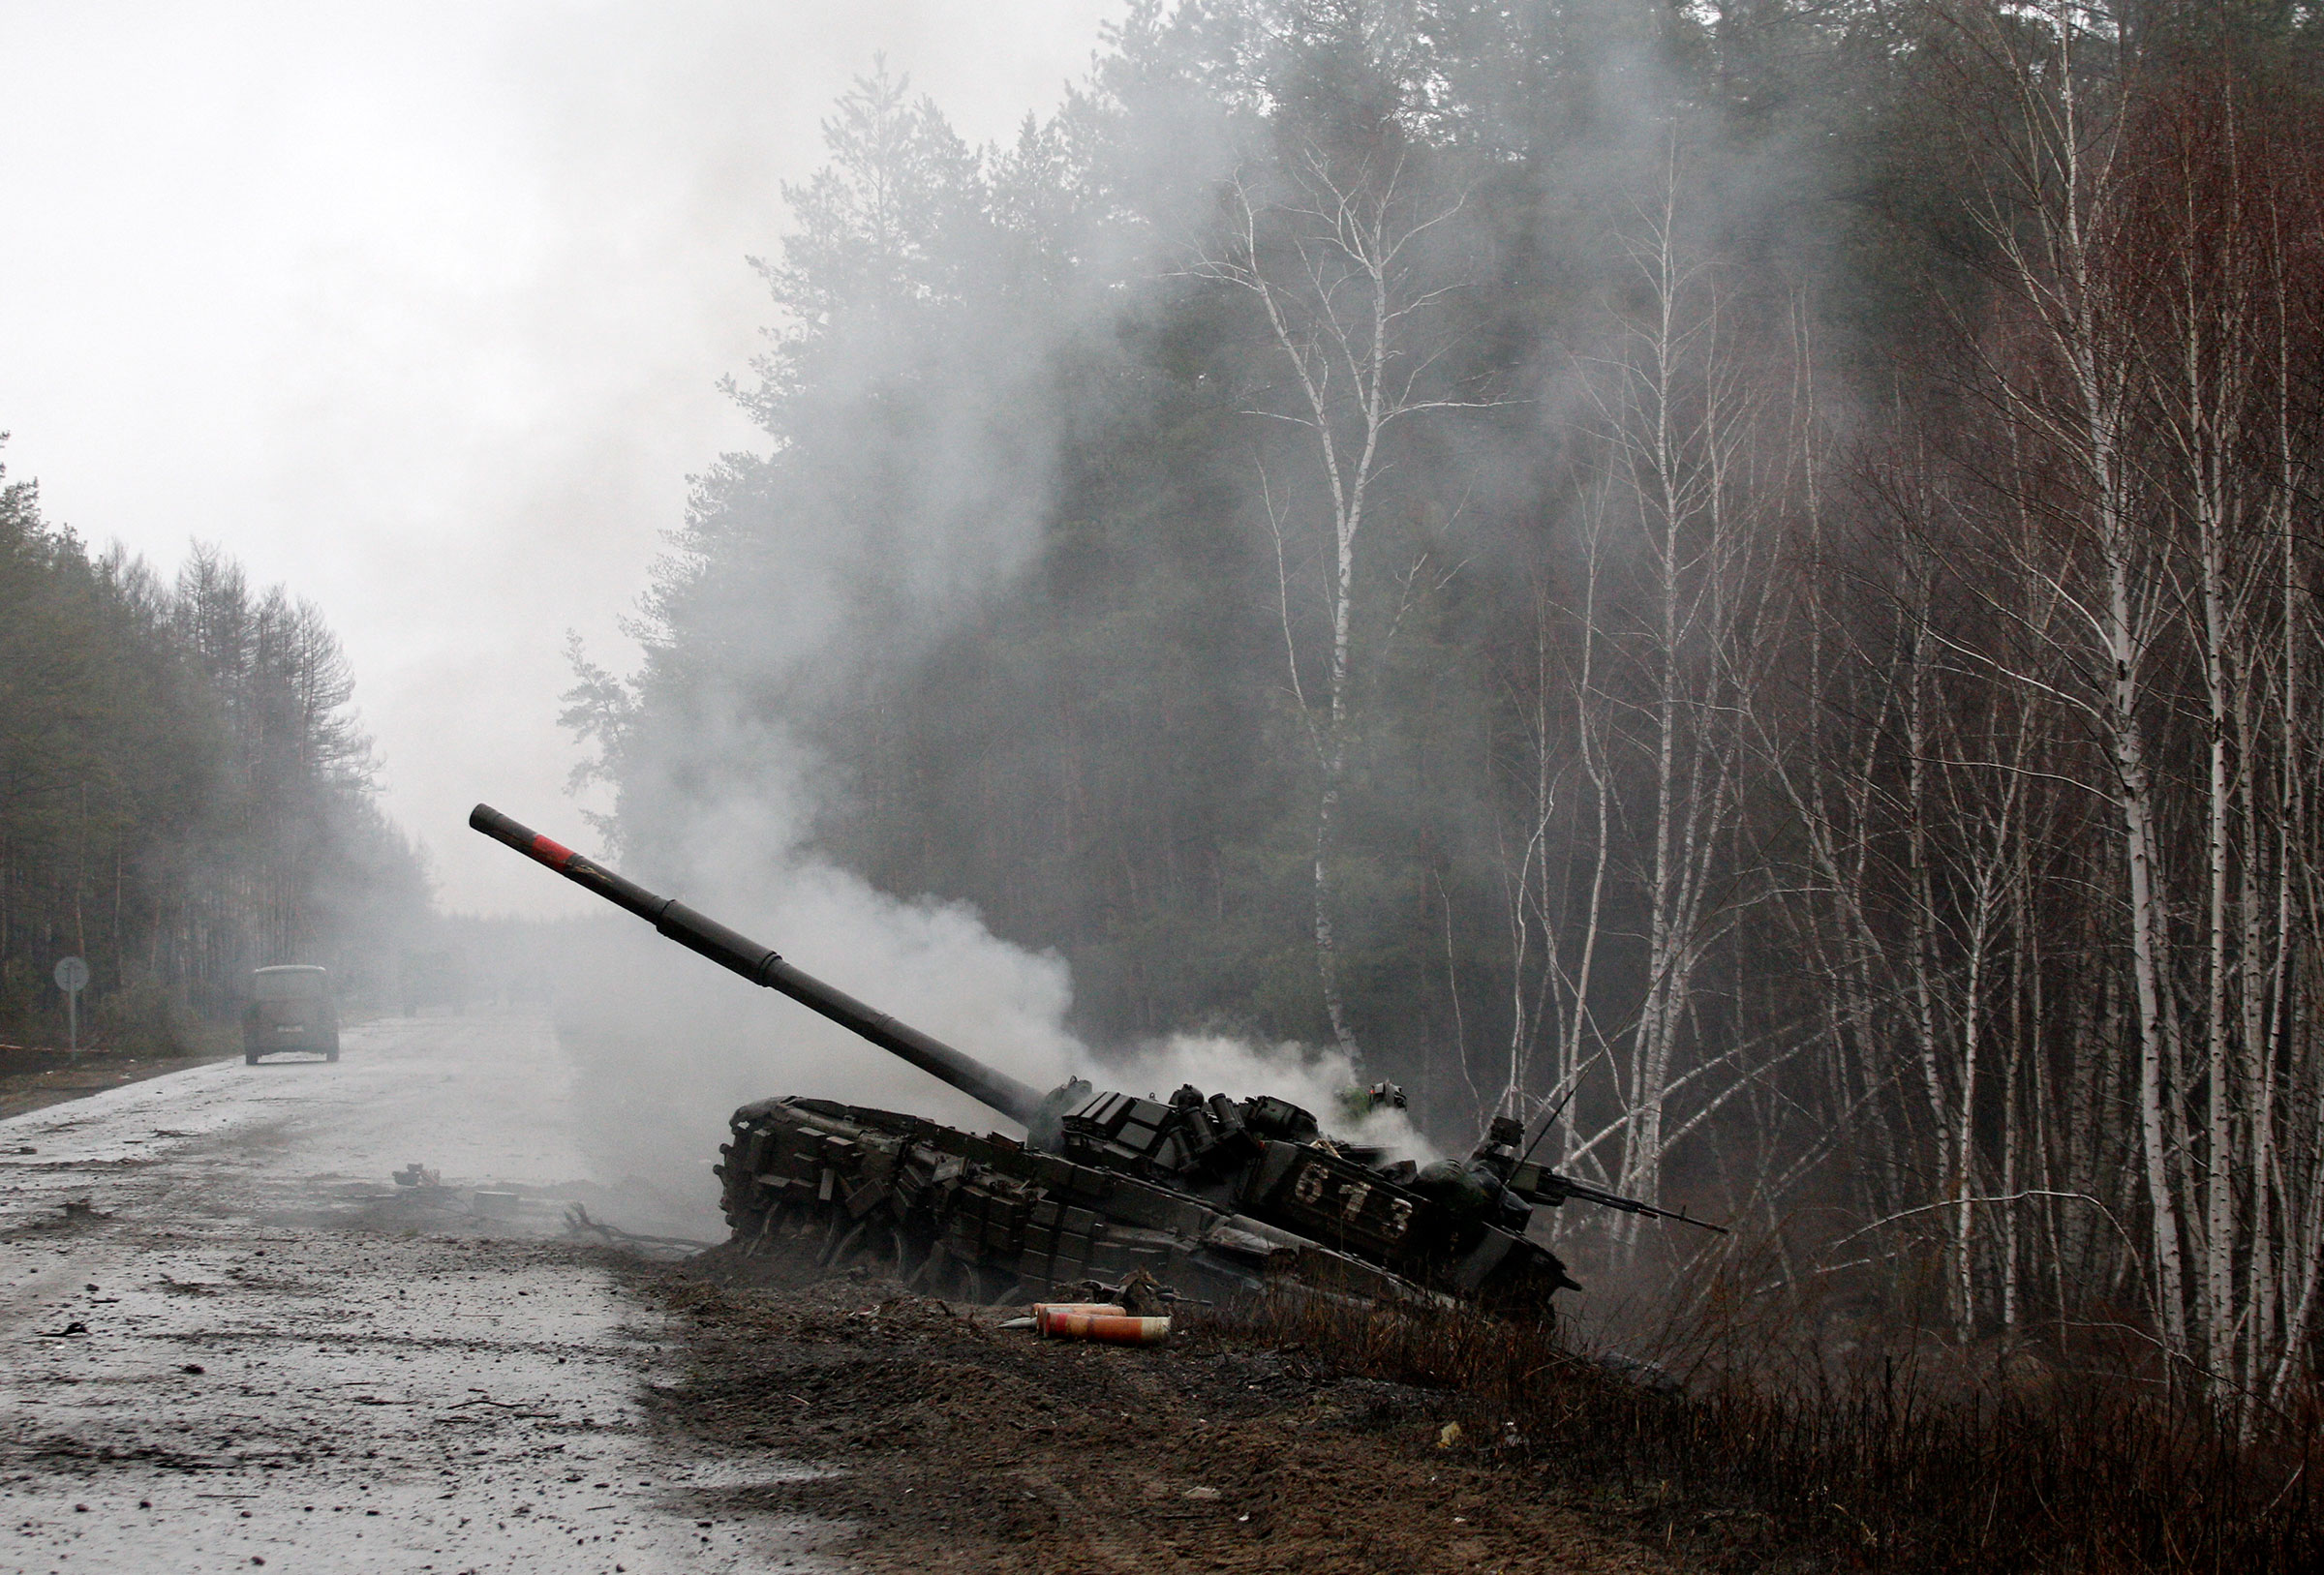 Smoke rises from a Russian tank destroyed by Ukrainian forces, on the side of a road in Lugansk region on Feb. 26, 2022. (AFP via Getty Images)